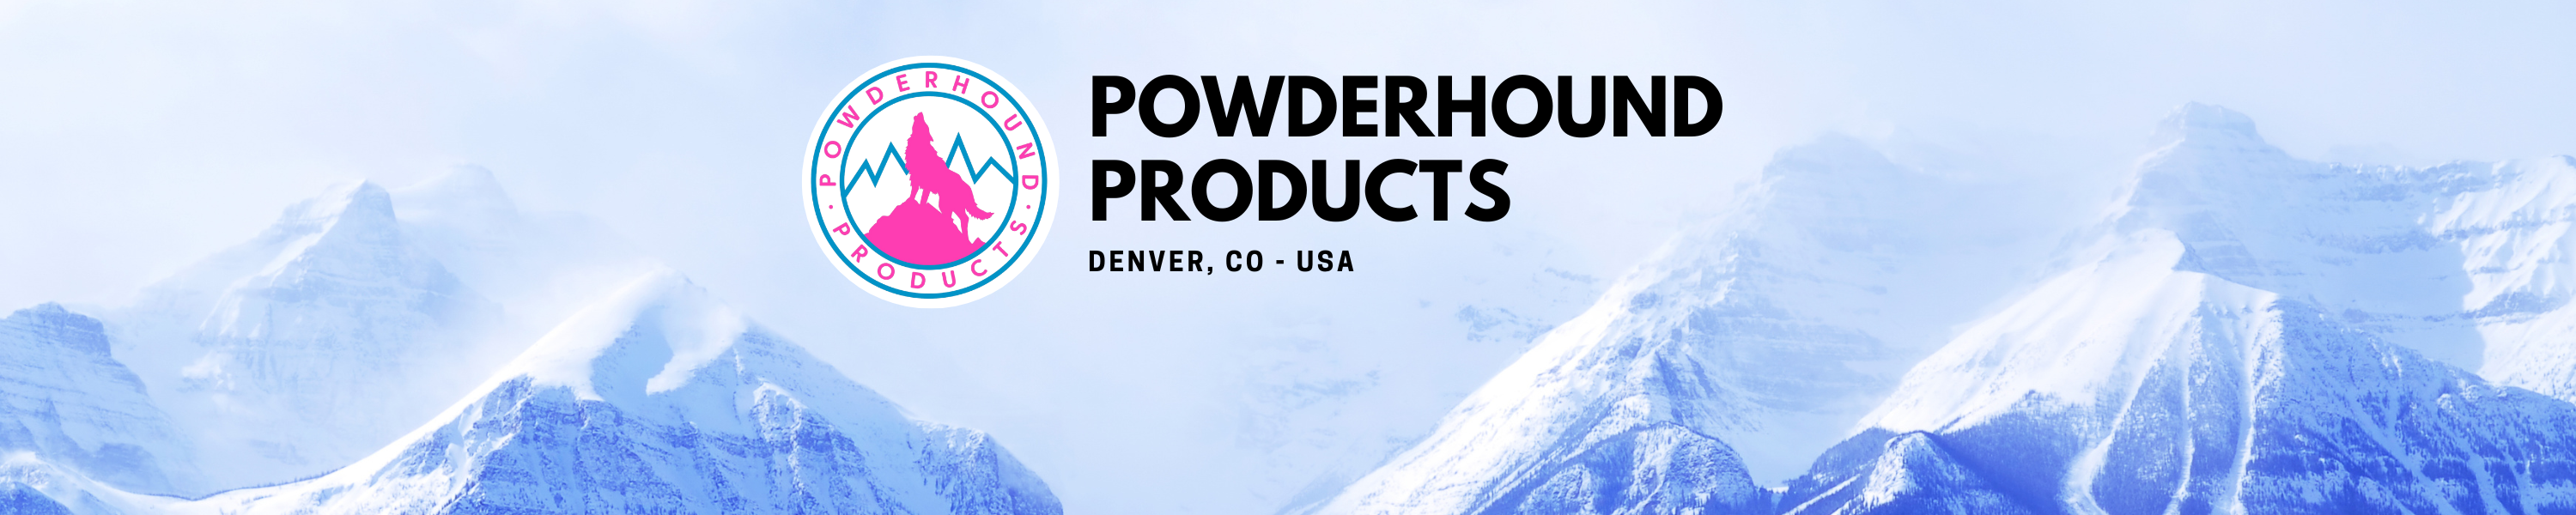 Powderhound, Powder, Hound, Powderhounds, Product, Products, Denver, CO, Colorado, USA, Forest, Woods, Outdoors, Hiking, Biking, Camping, Trees, Pines, Conifer, Hike, Bike, Camp, Trail, Mountain, park, snowflake, snow, ski,skiing,snowboarding, snowboard, snowboards, boots, travel, goggle, cover, sleeve, case, protector